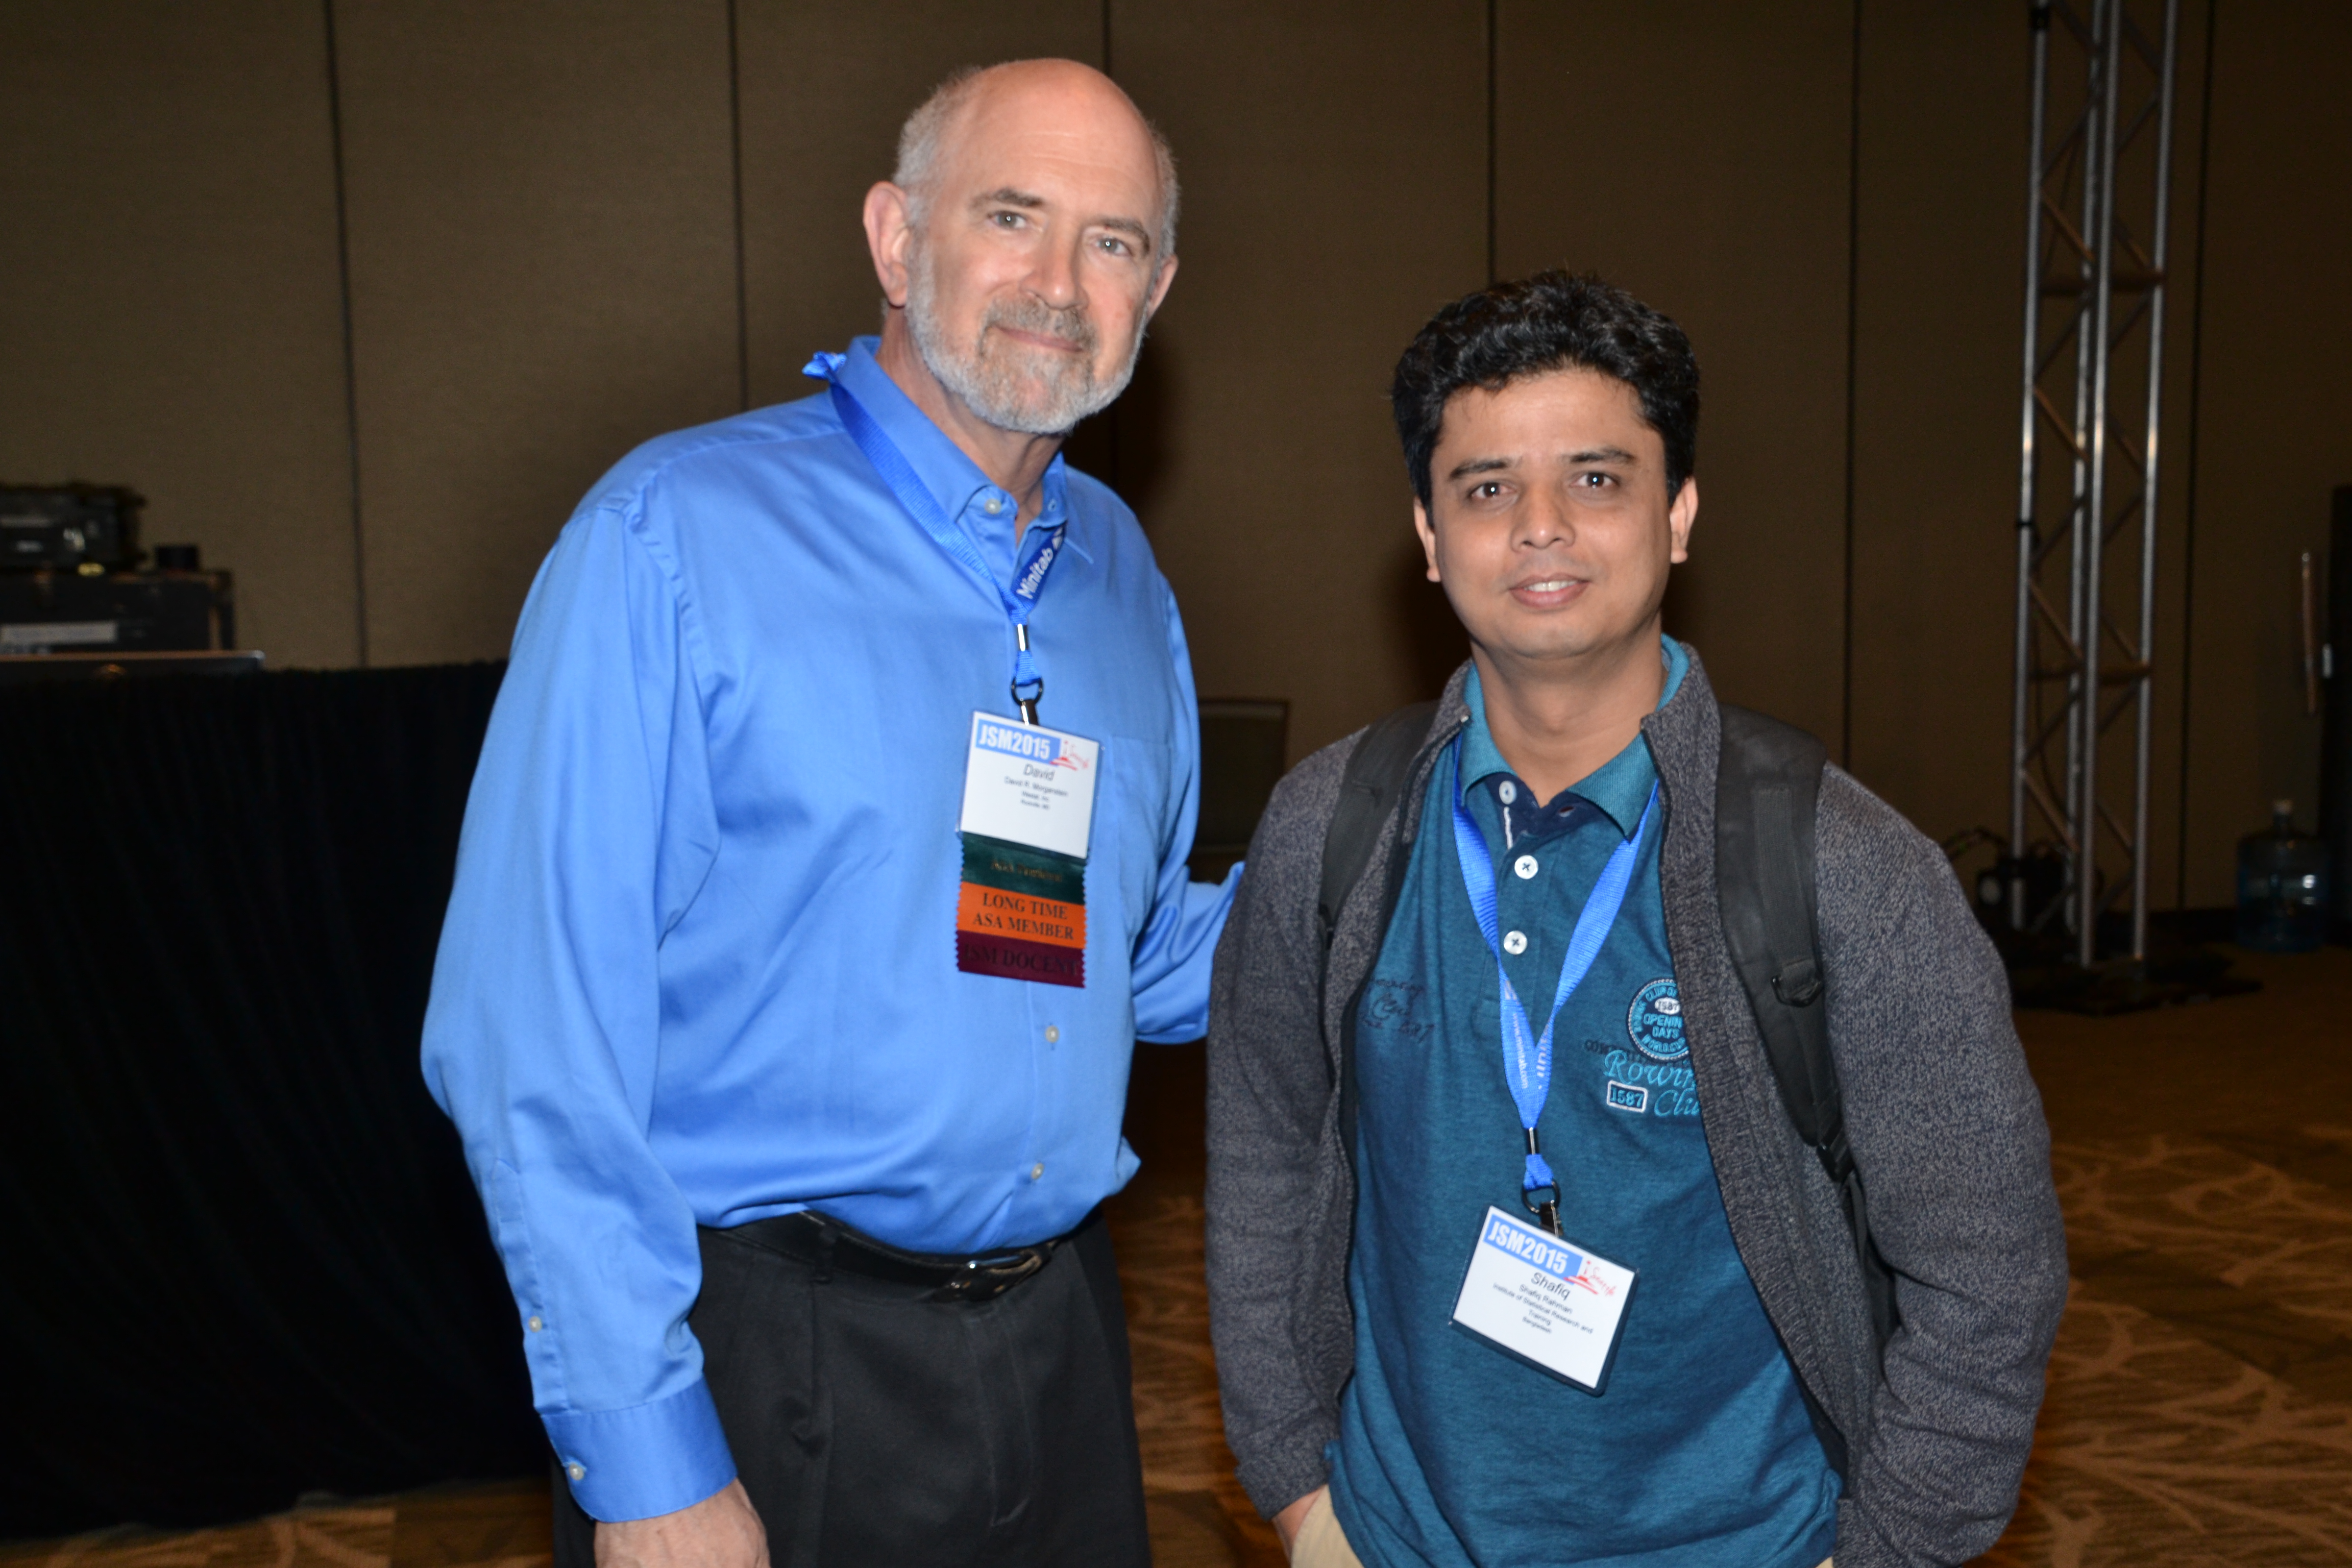 ASA President David Morganstein with Educational Ambassador Shafiq Rahman of the Institute of Statistical Research and Training in Dhaka, Bangladesh 